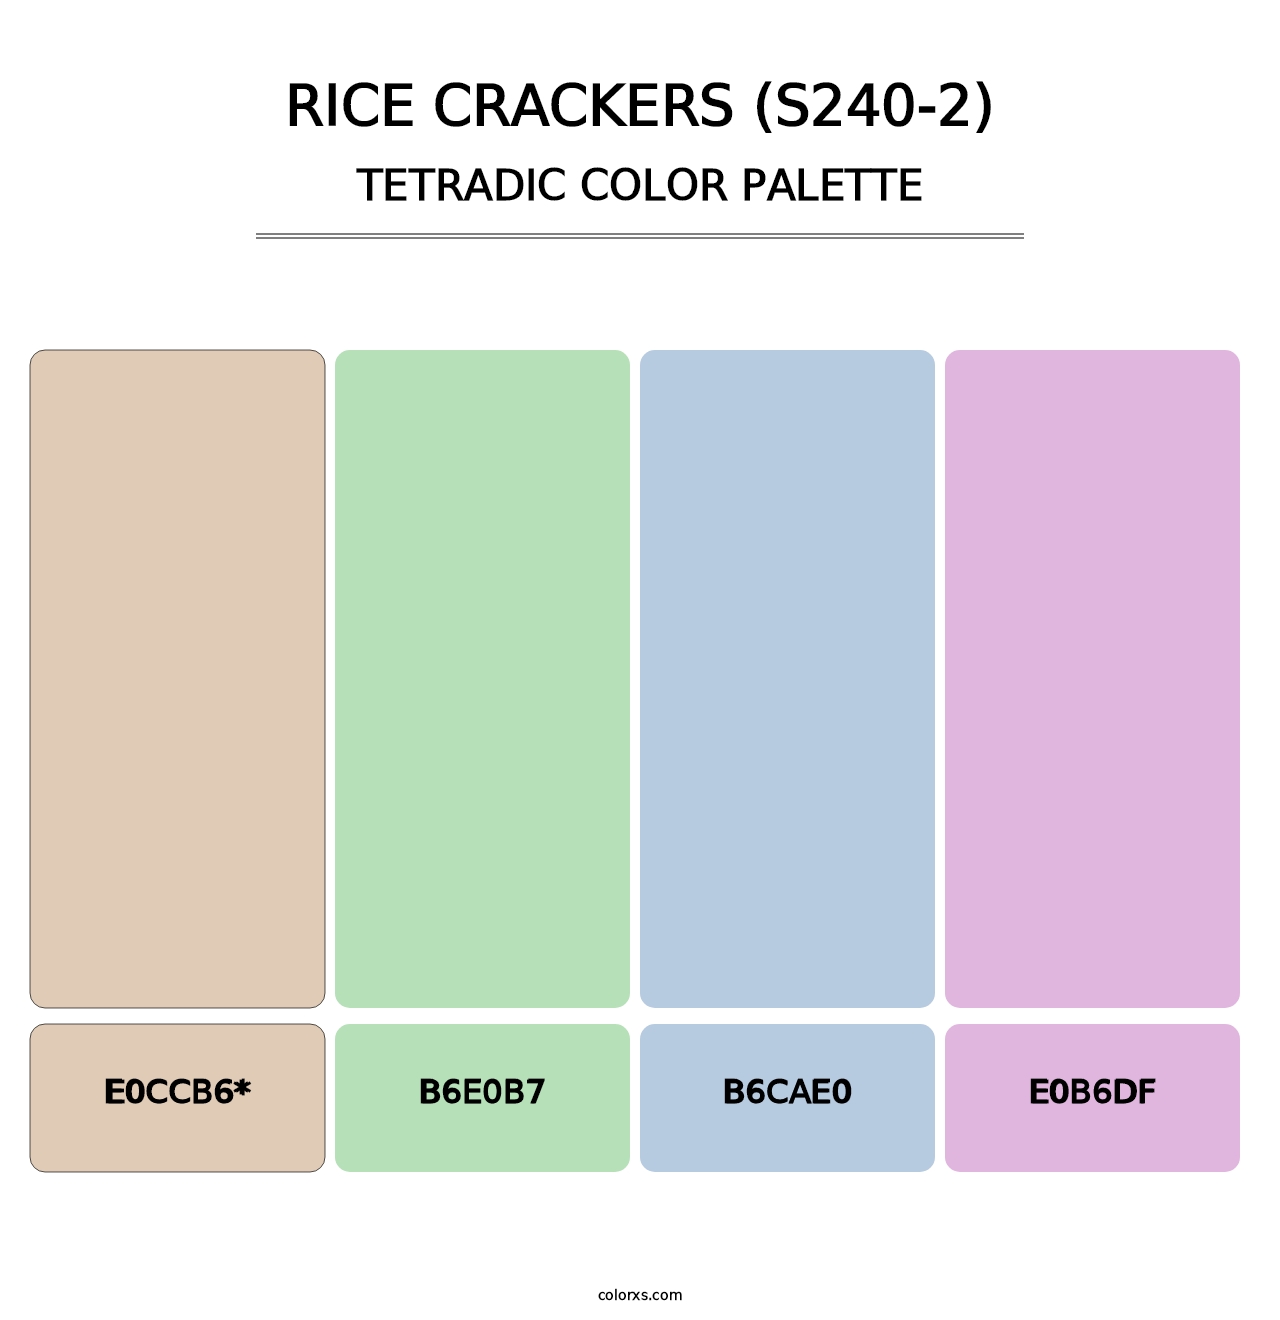 Rice Crackers (S240-2) - Tetradic Color Palette